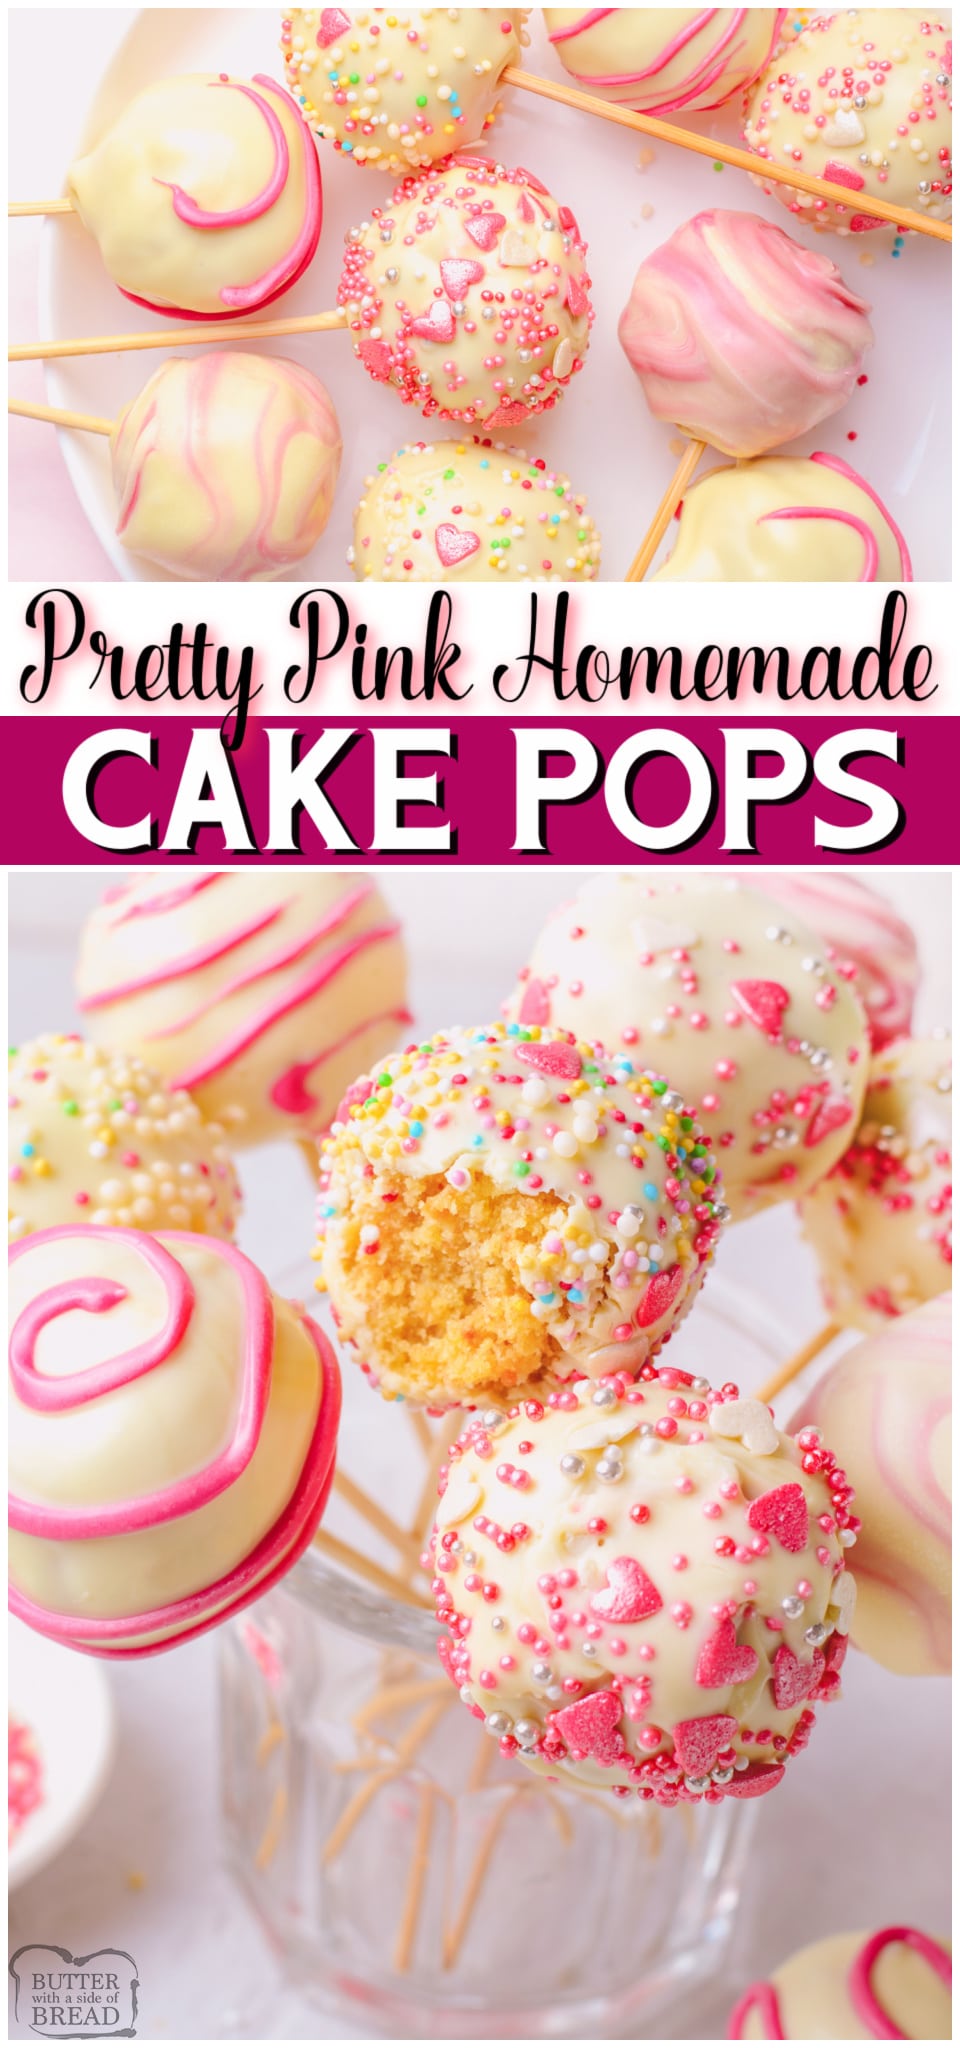 Homemade Vanilla Pink Cake Pops are fun & tasty treats for any occasion! Sweet Cake Pops covered in white chocolate & decorated to be perfectly pink for Valentine's Day! 